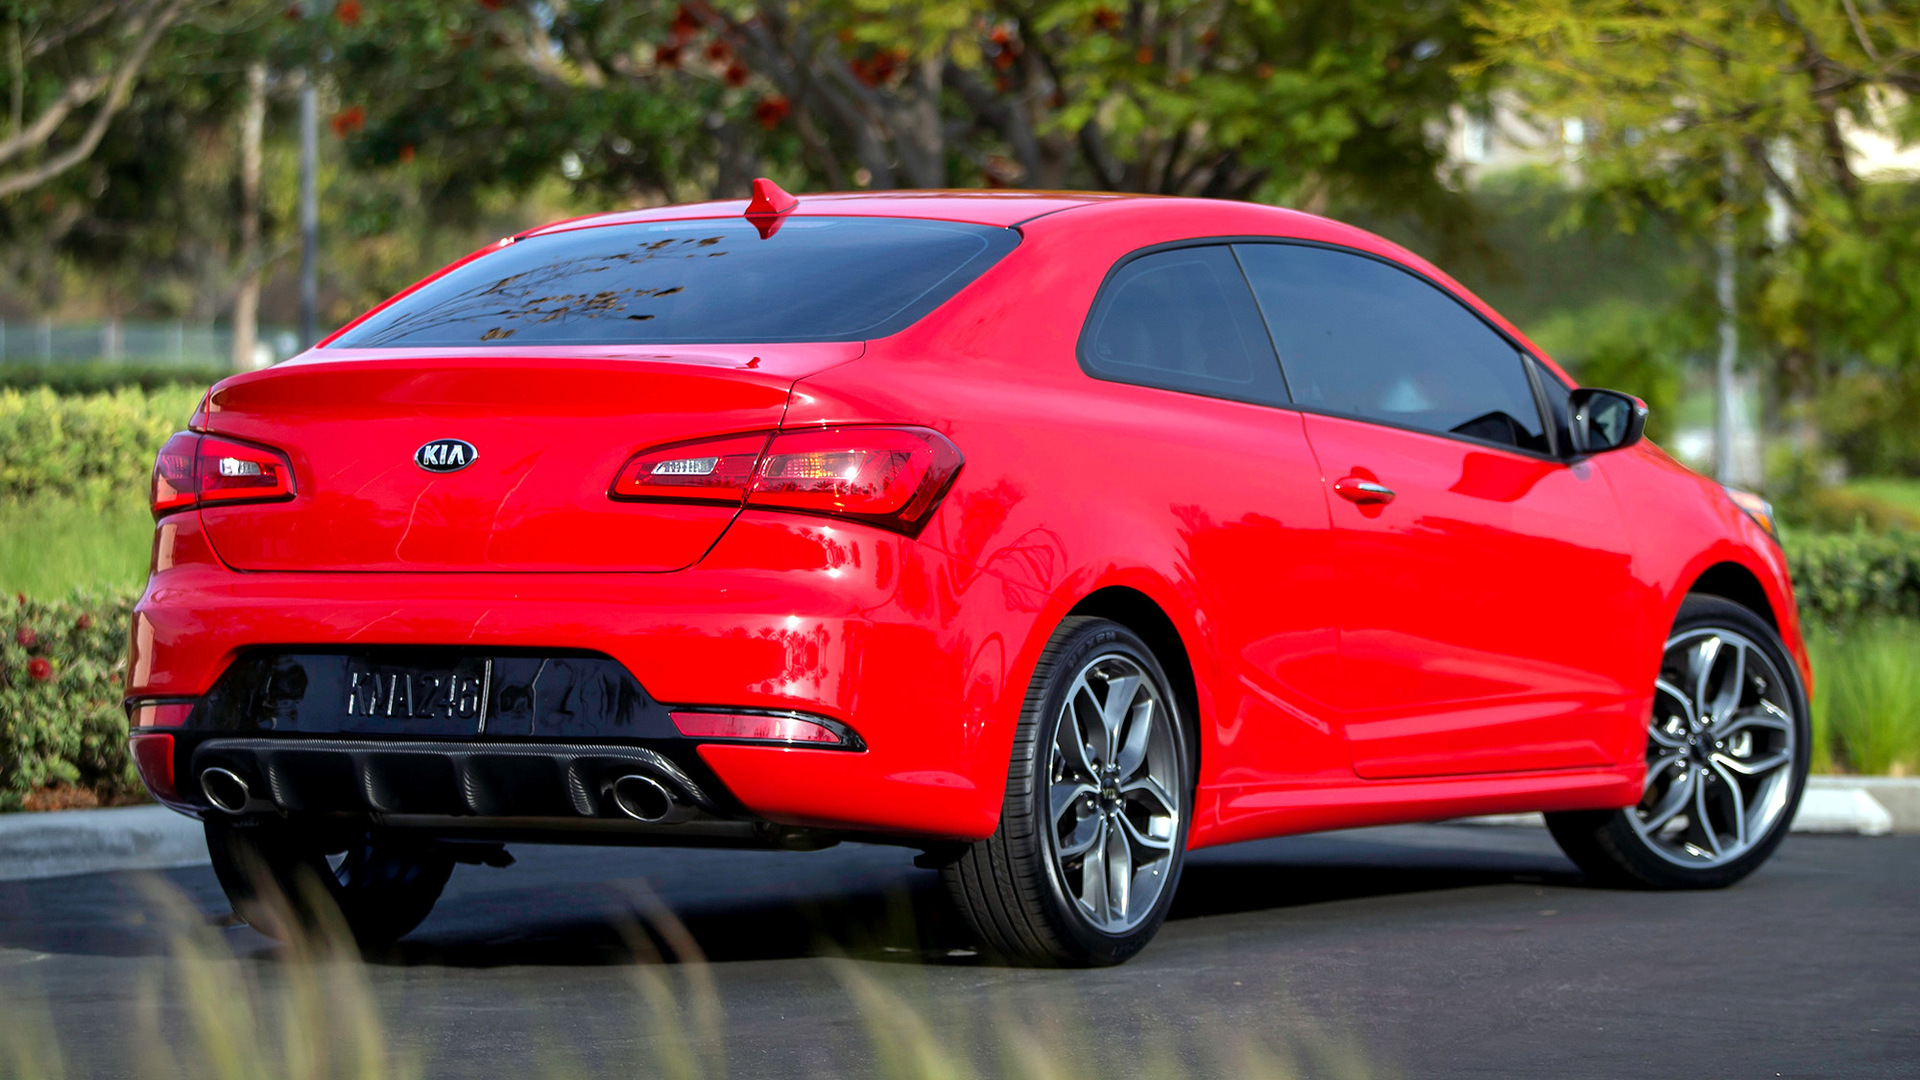 Car Compact Car Coupe Kia Forte Koup Red Car Wallpaper - Resolution ...